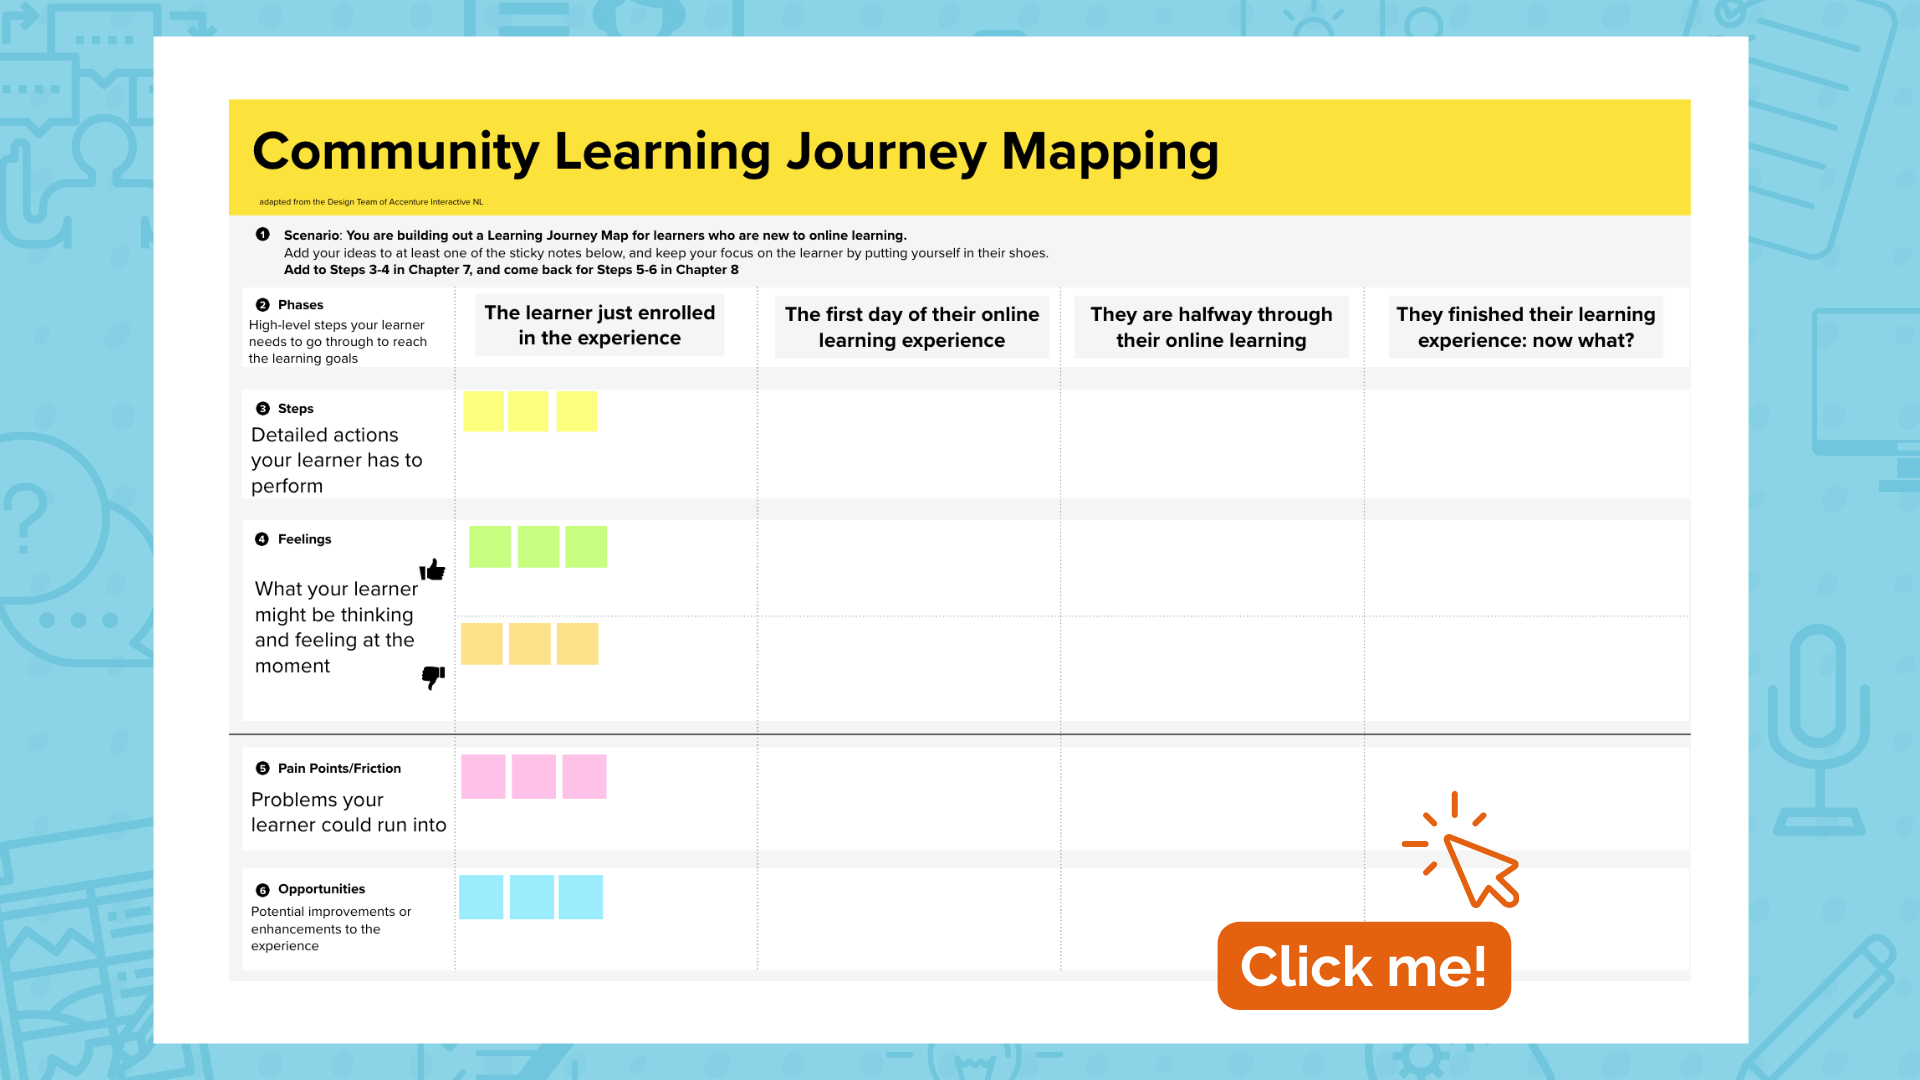 Click this image to open a MURAL board in a new tab, called Learning Journey Mapping